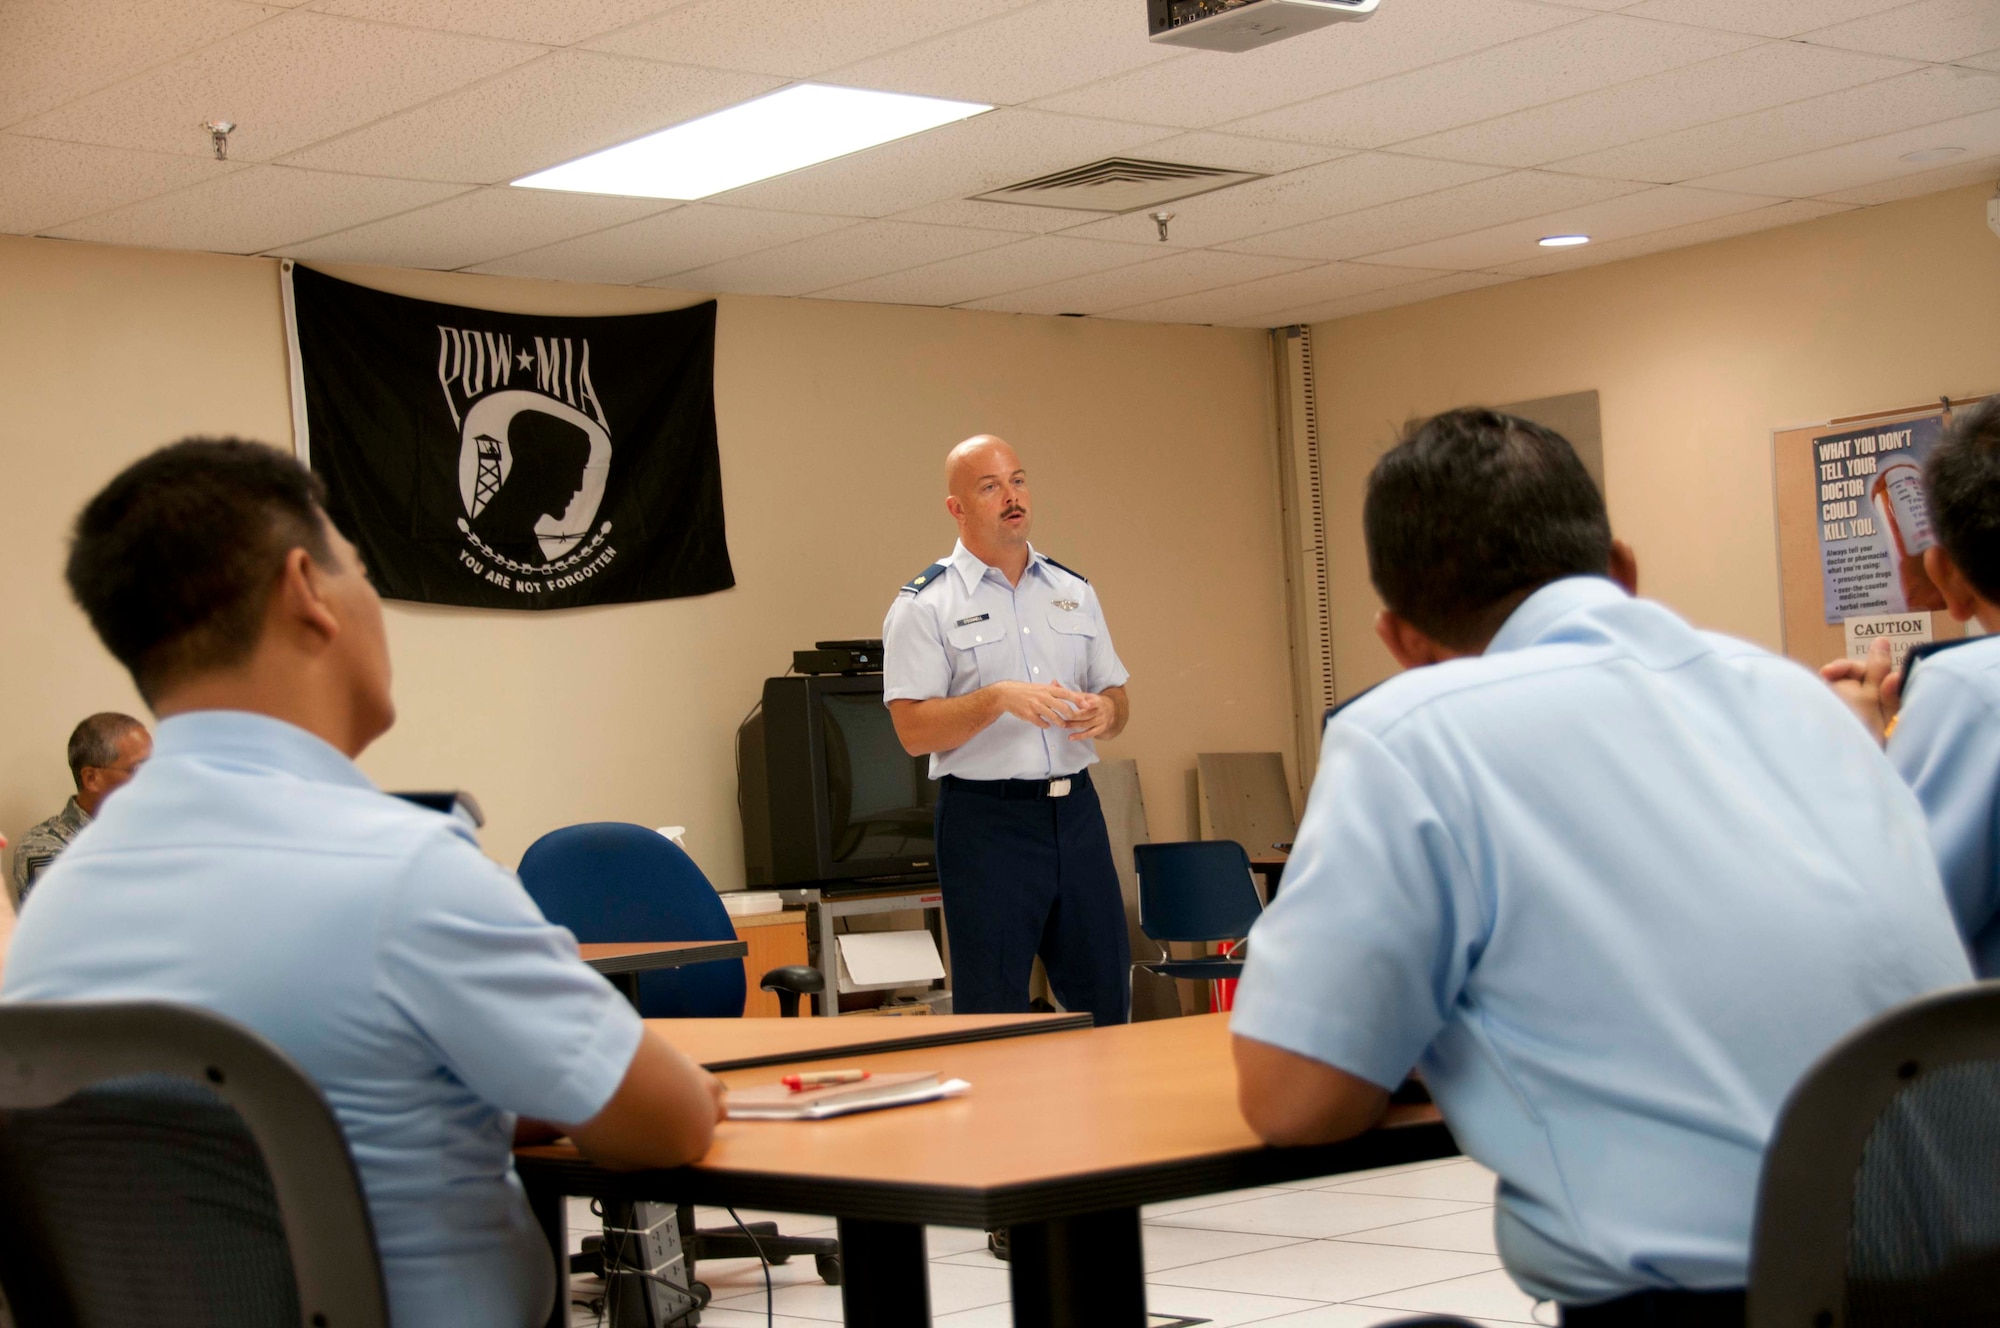 U.S. Air Force Maj. Michael O'Donnell, mission crew commander from the Hawaii Air National Guard's 169th Air Defense Squadron, briefs the Indonesian delegates on the first day of the Subject Matter Expert Exchange for the State Partnership Program on Wheeler Army Airfield, Hawaii on Aug. 30, 2016. The State Partnership Program is administered by the National Guard Bureau, guided by State Department foreign policy goals, and executed by the state adjutants general in support of combatant commander of U.S. Chief of Mission security cooperation objectives and Department of Defense policy goals. (U.S. Air National Guard photo by Airman 1st Class Stan Pak/released) 